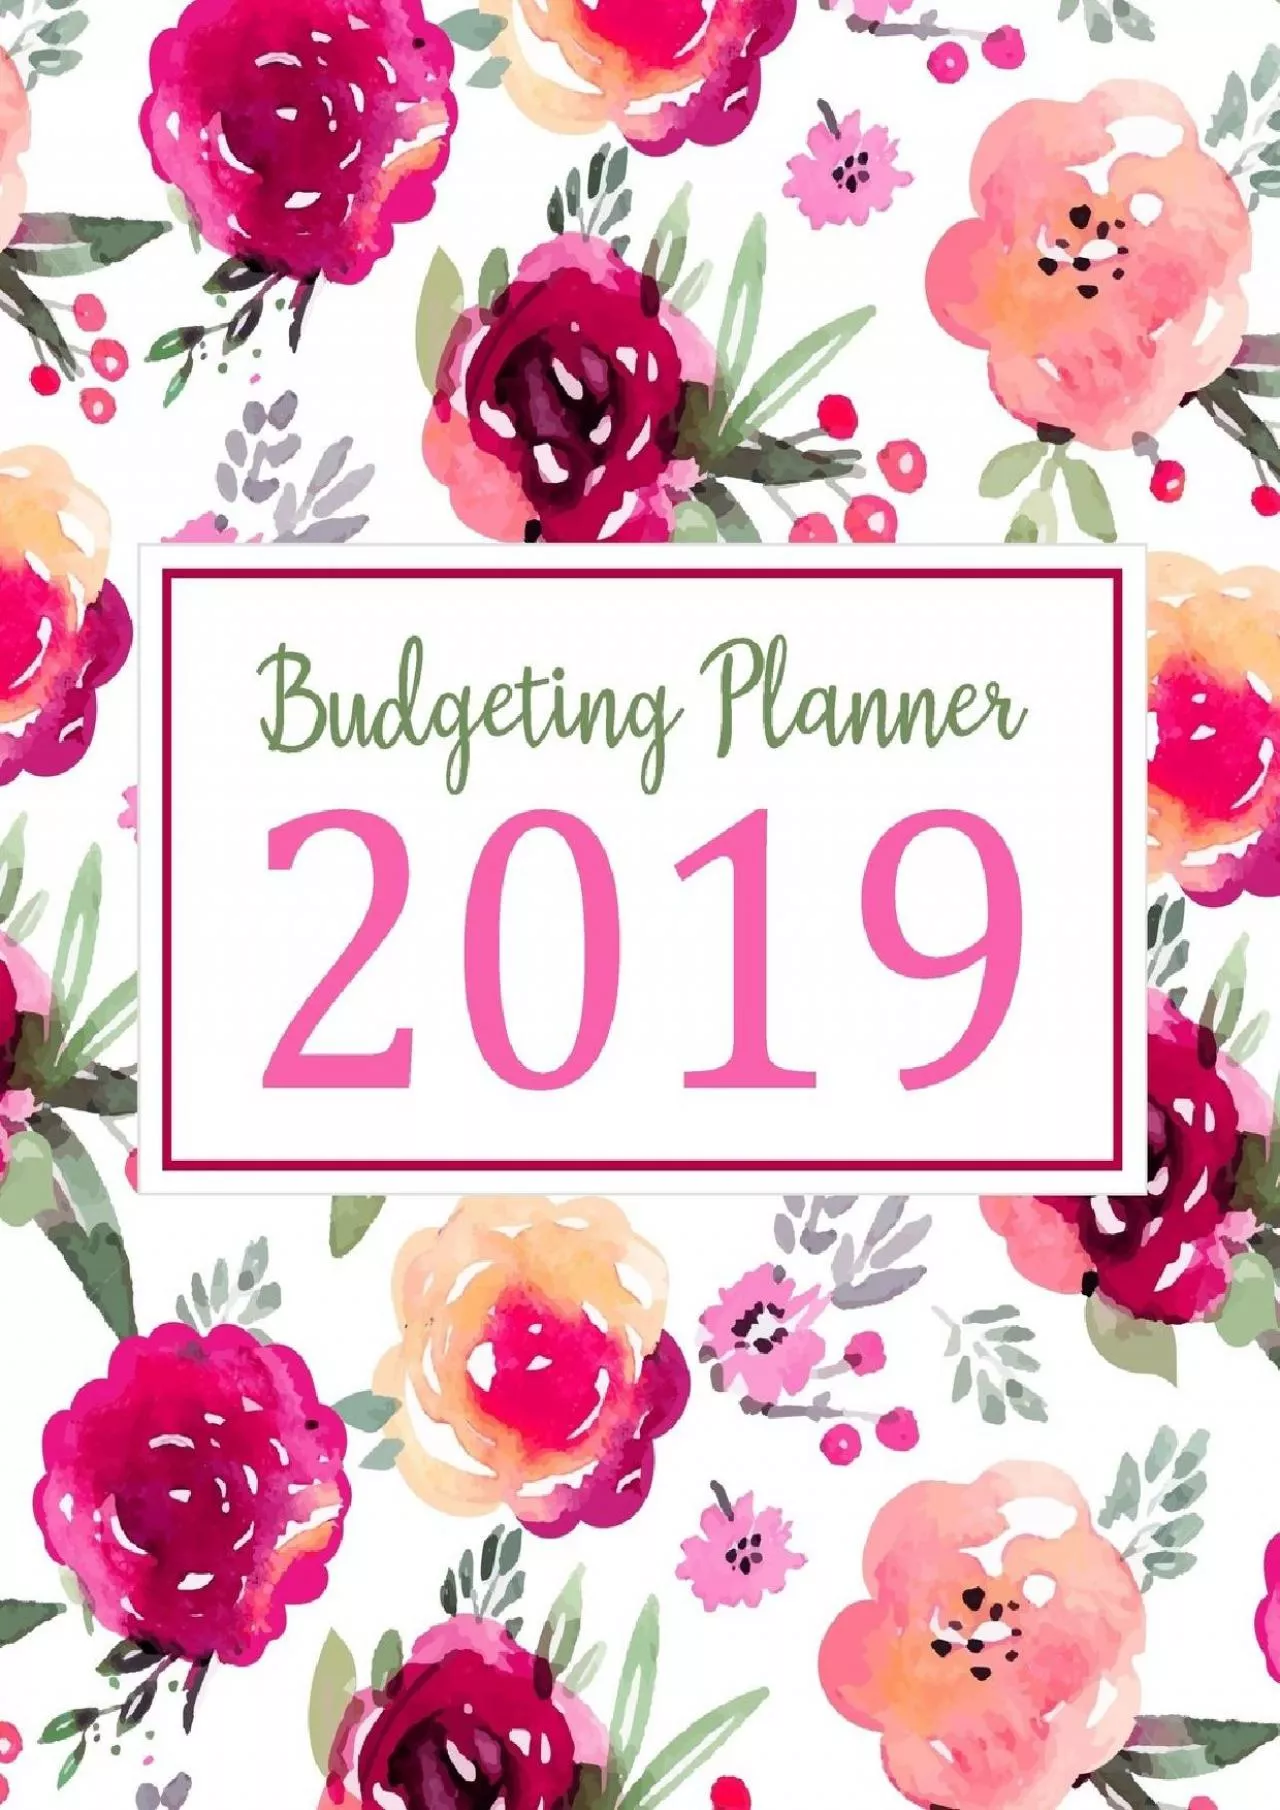 Budgeting Planner 2019: Daily Weekly & Monthly Calendar Expense Tracker Organizer For